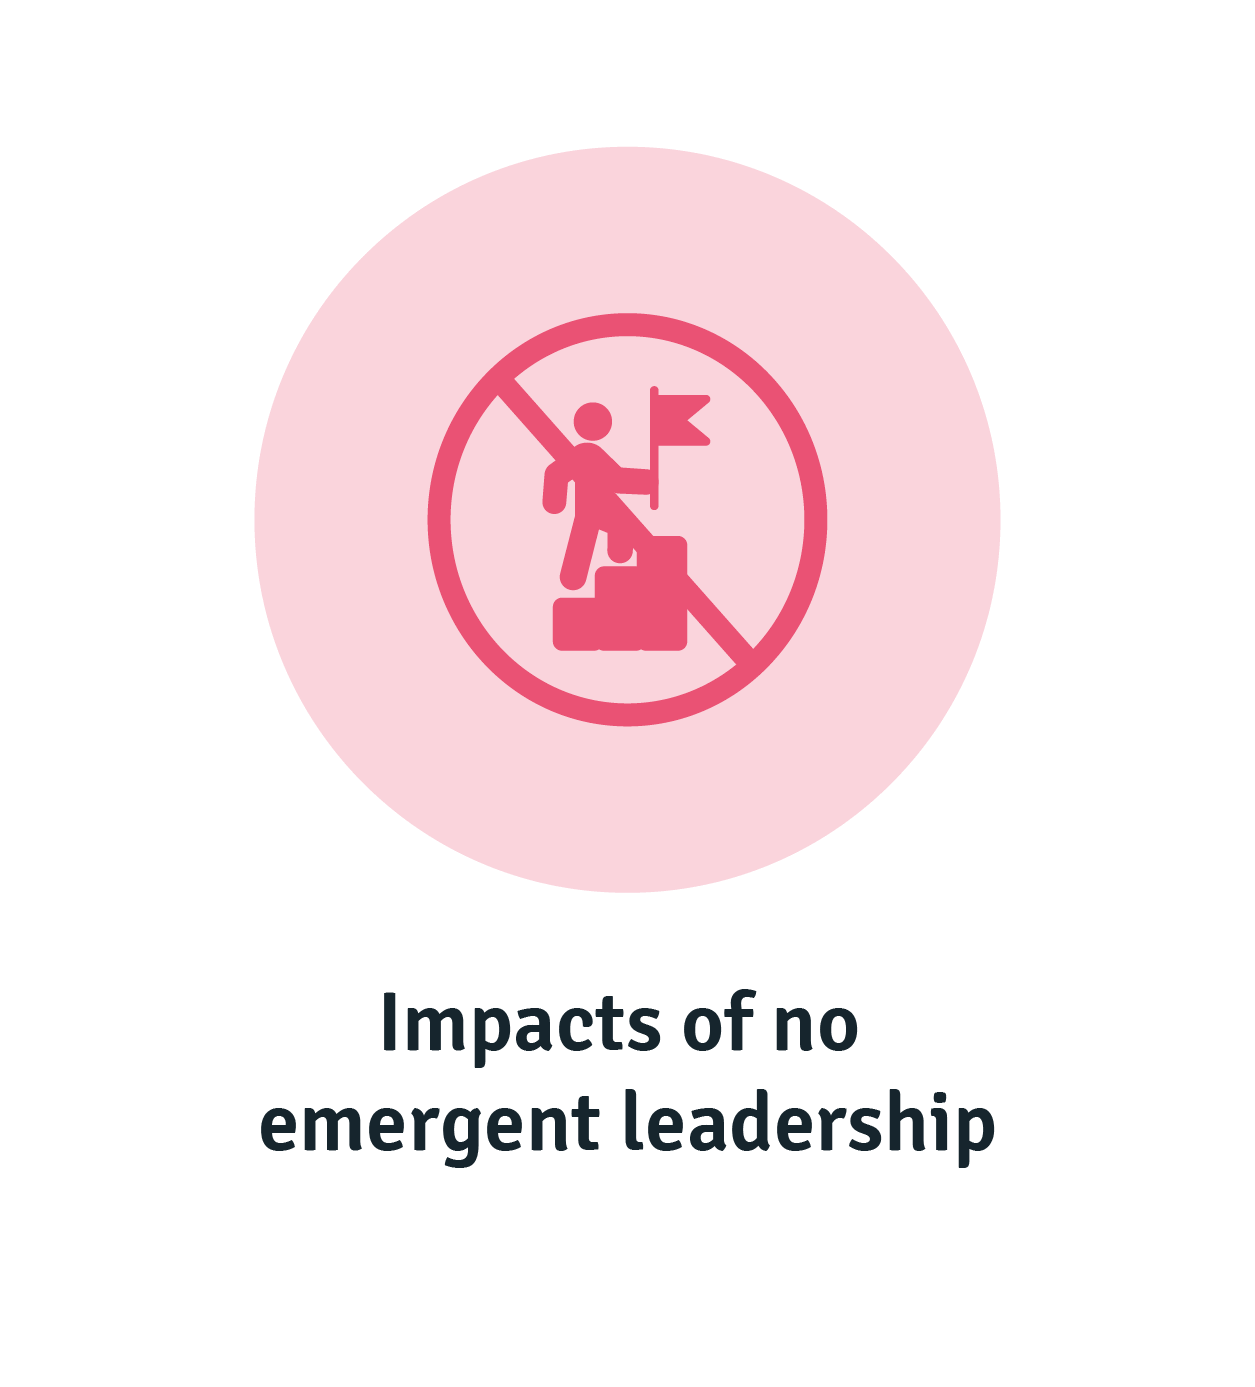 Impacts of no emergent leadership